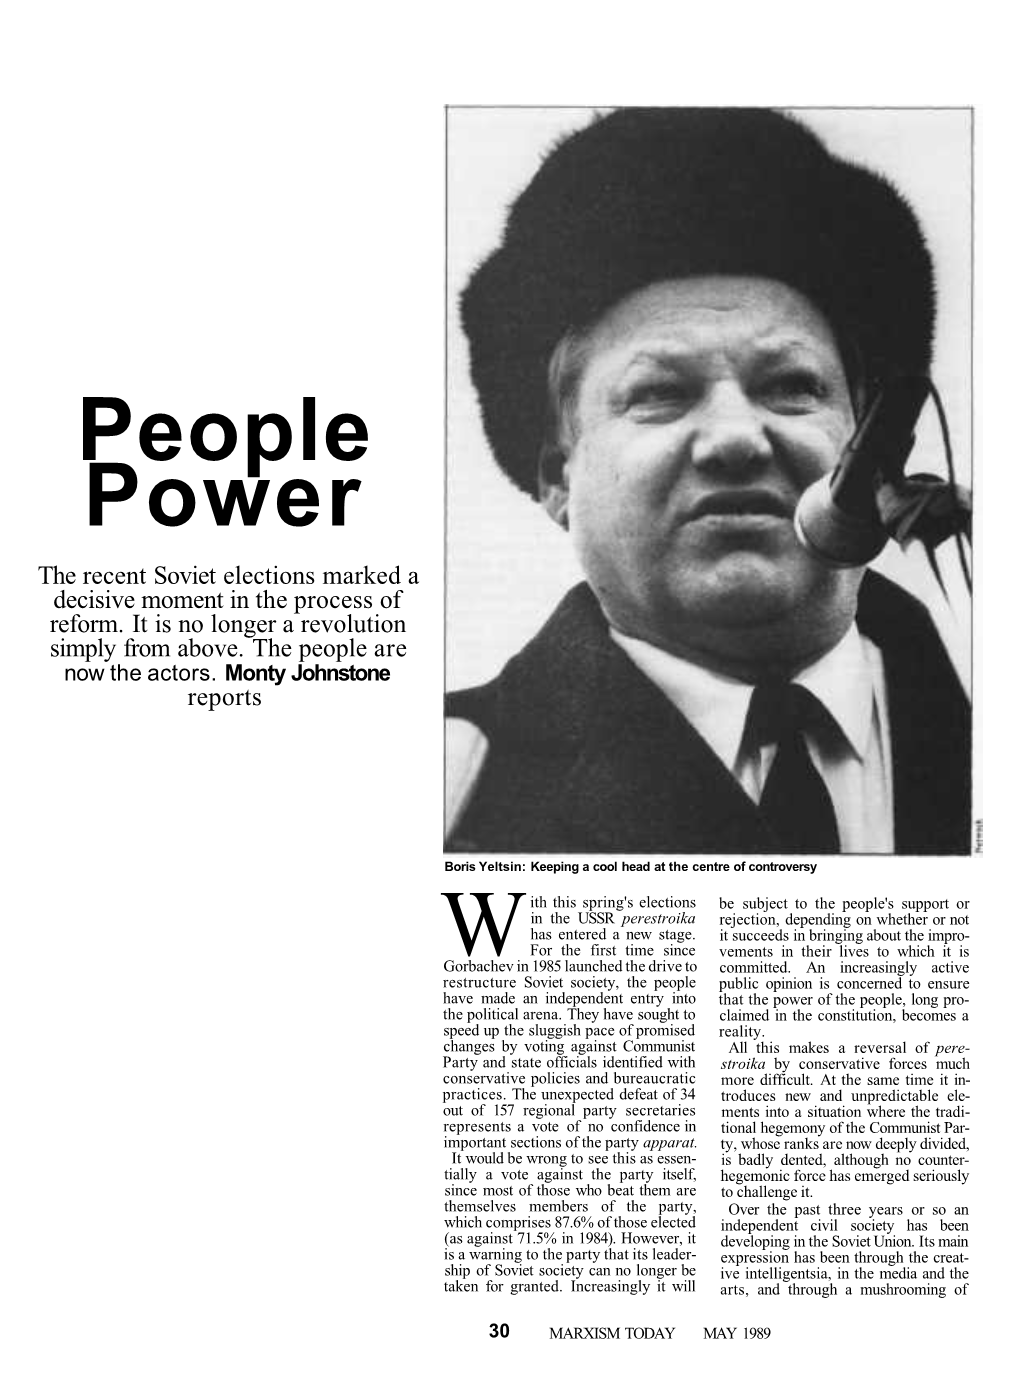 People Power the Recent Soviet Elections Marked a Decisive Moment in the Process of Reform